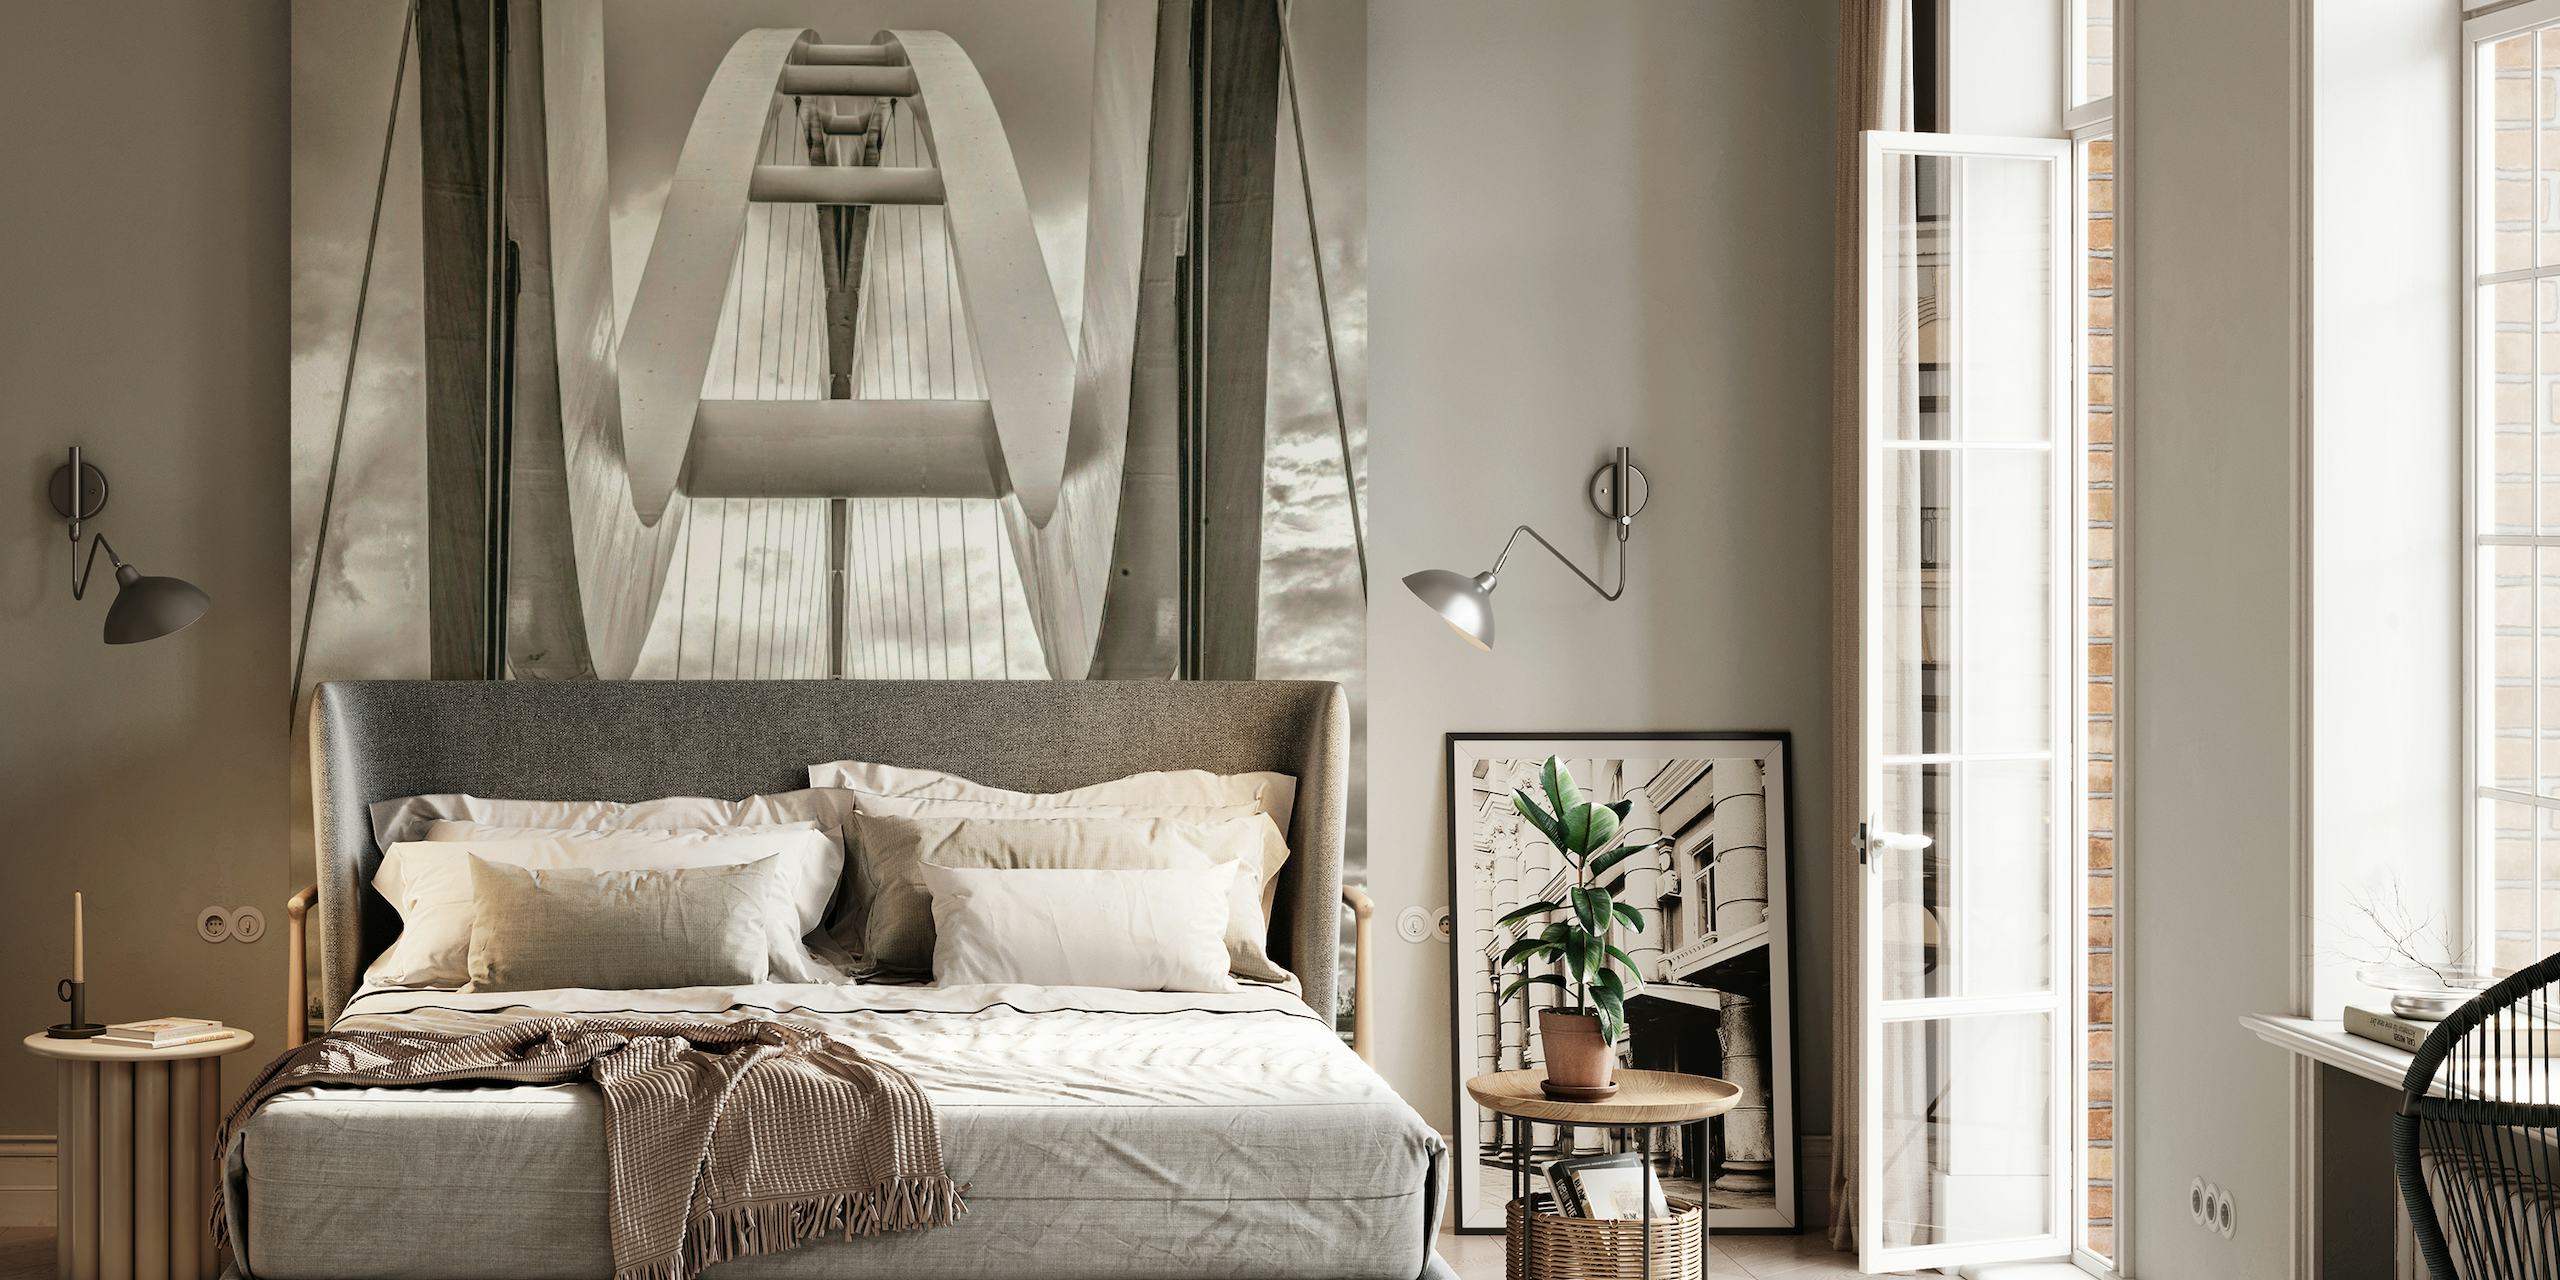 Monochrome Infinity Bridge wall mural in a modern architectural style